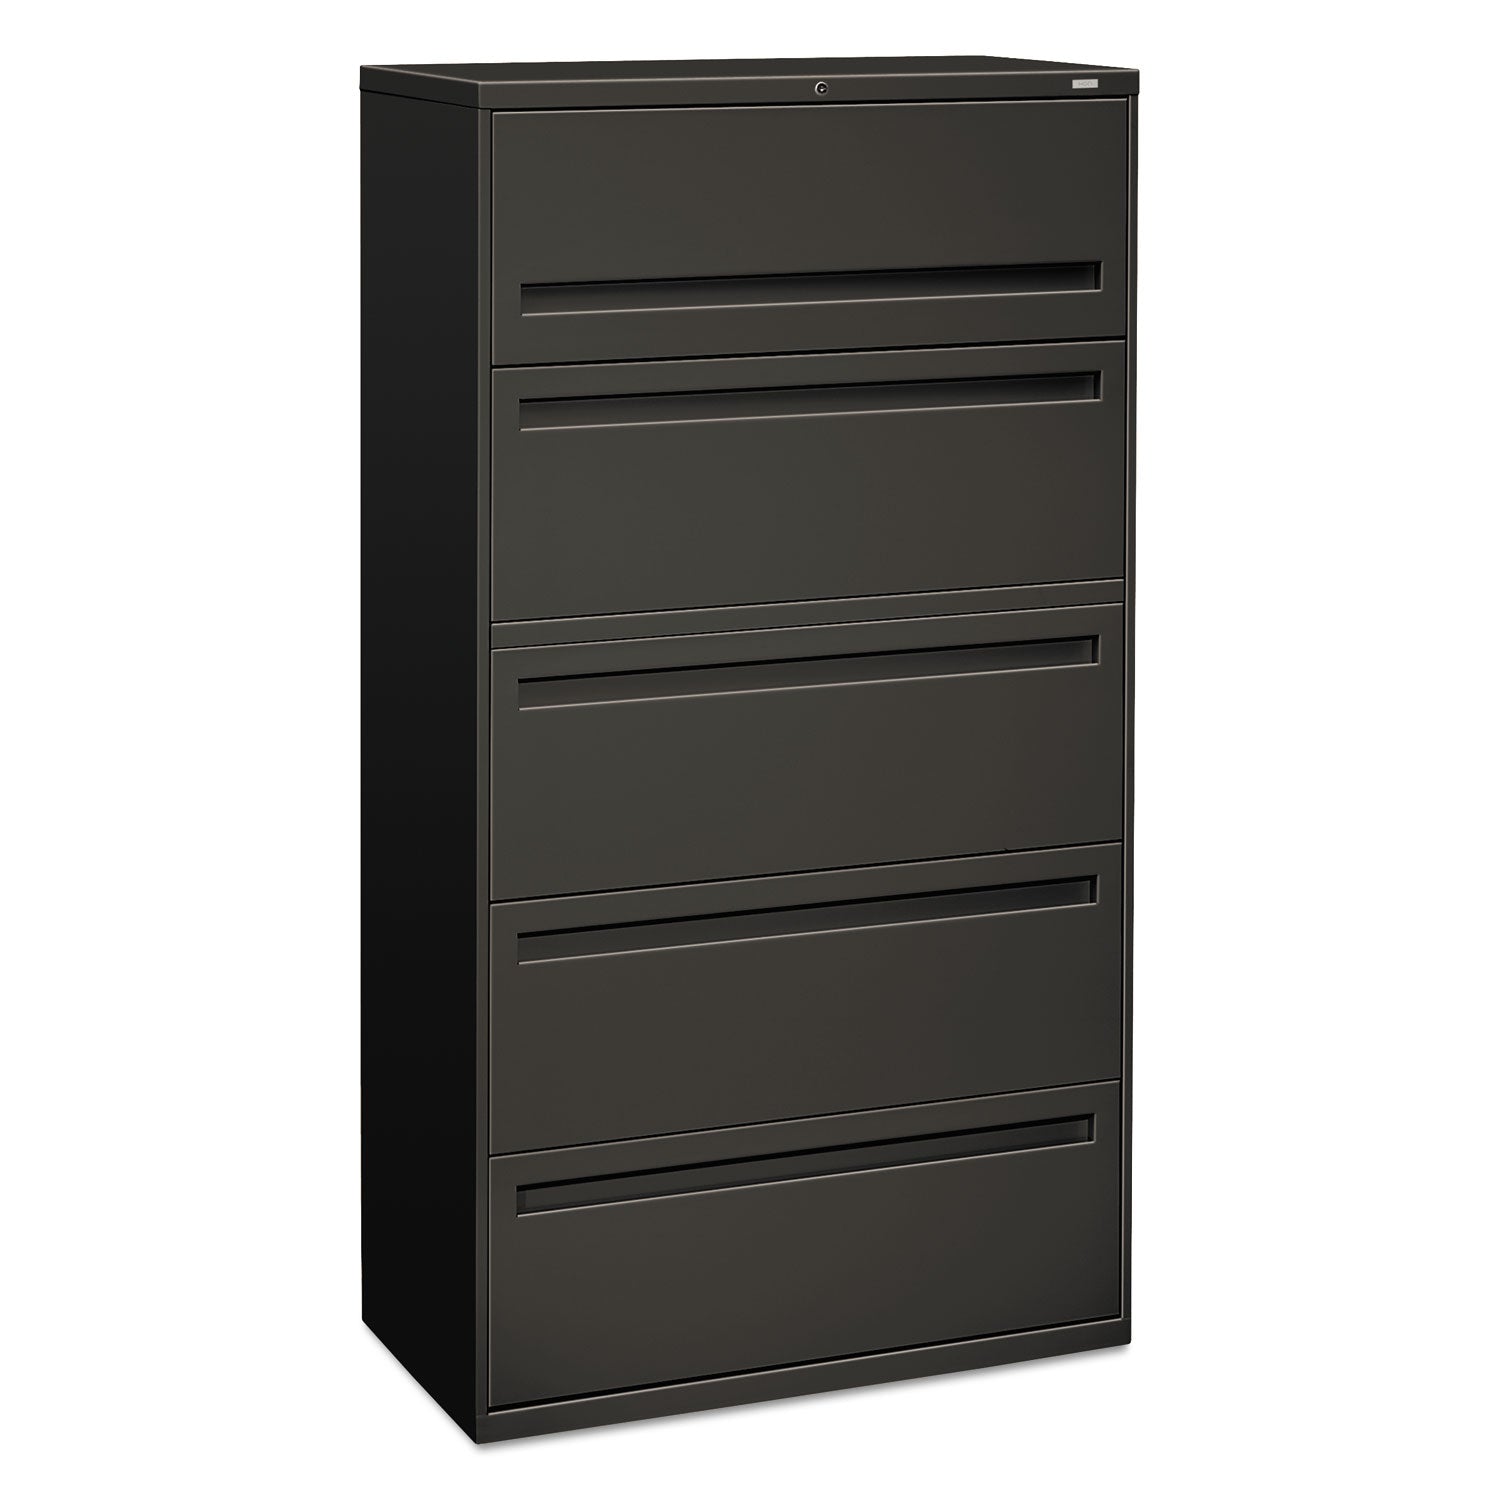 Brigade 700 Series Lateral File, 4 Legal/Letter-Size File Drawers, 1 File Shelf, 1 Post Shelf, Charcoal, 36" x 18" x 64.25 - 